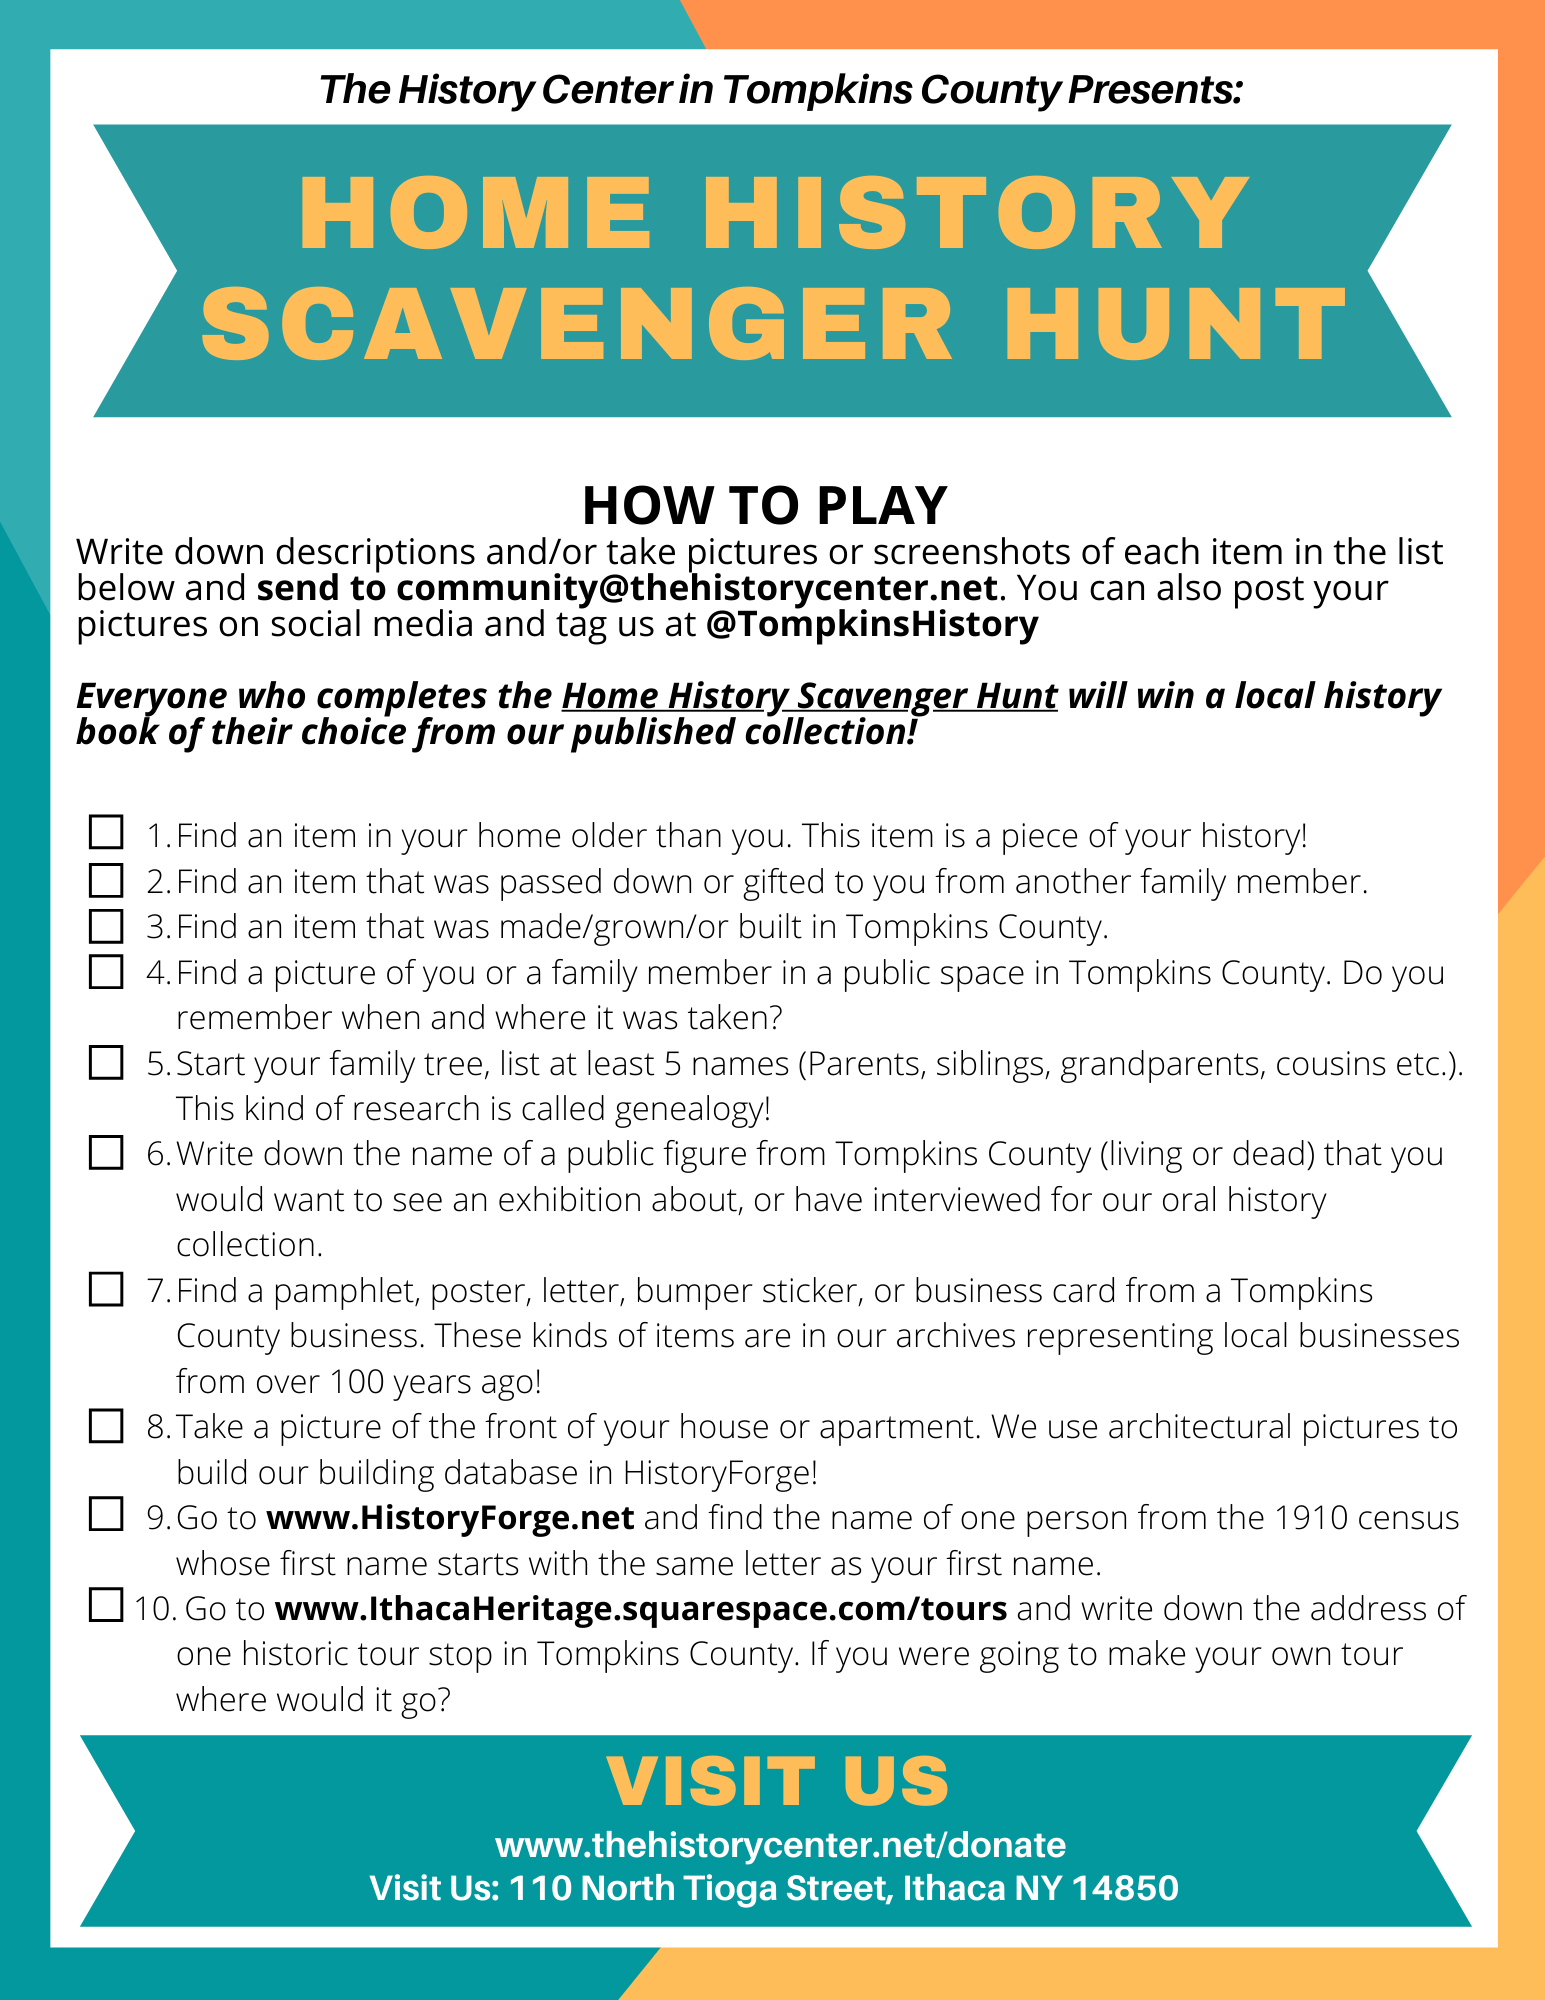 A link/image to a downloadable activity called "Home History Scavenger Hunt"